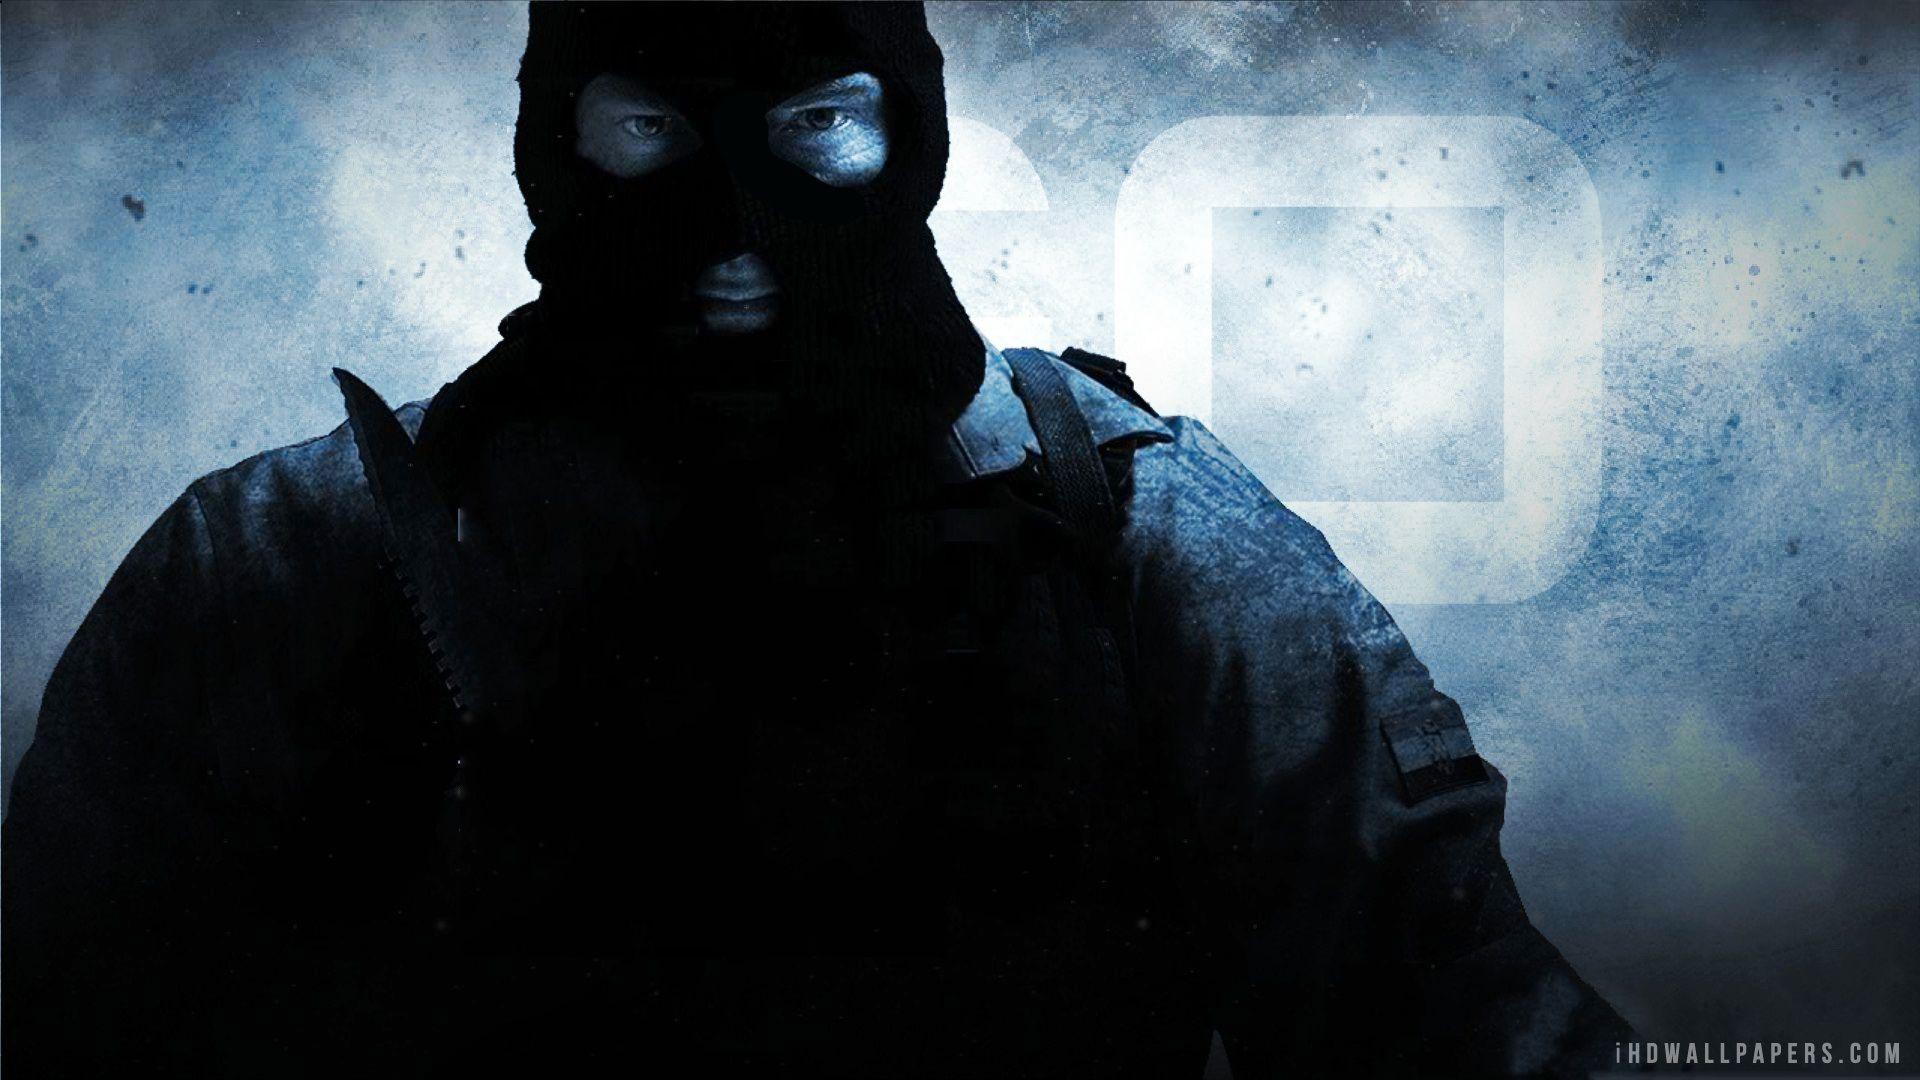 Counter Strike Global Offensive Wallpaper High Quality. Download